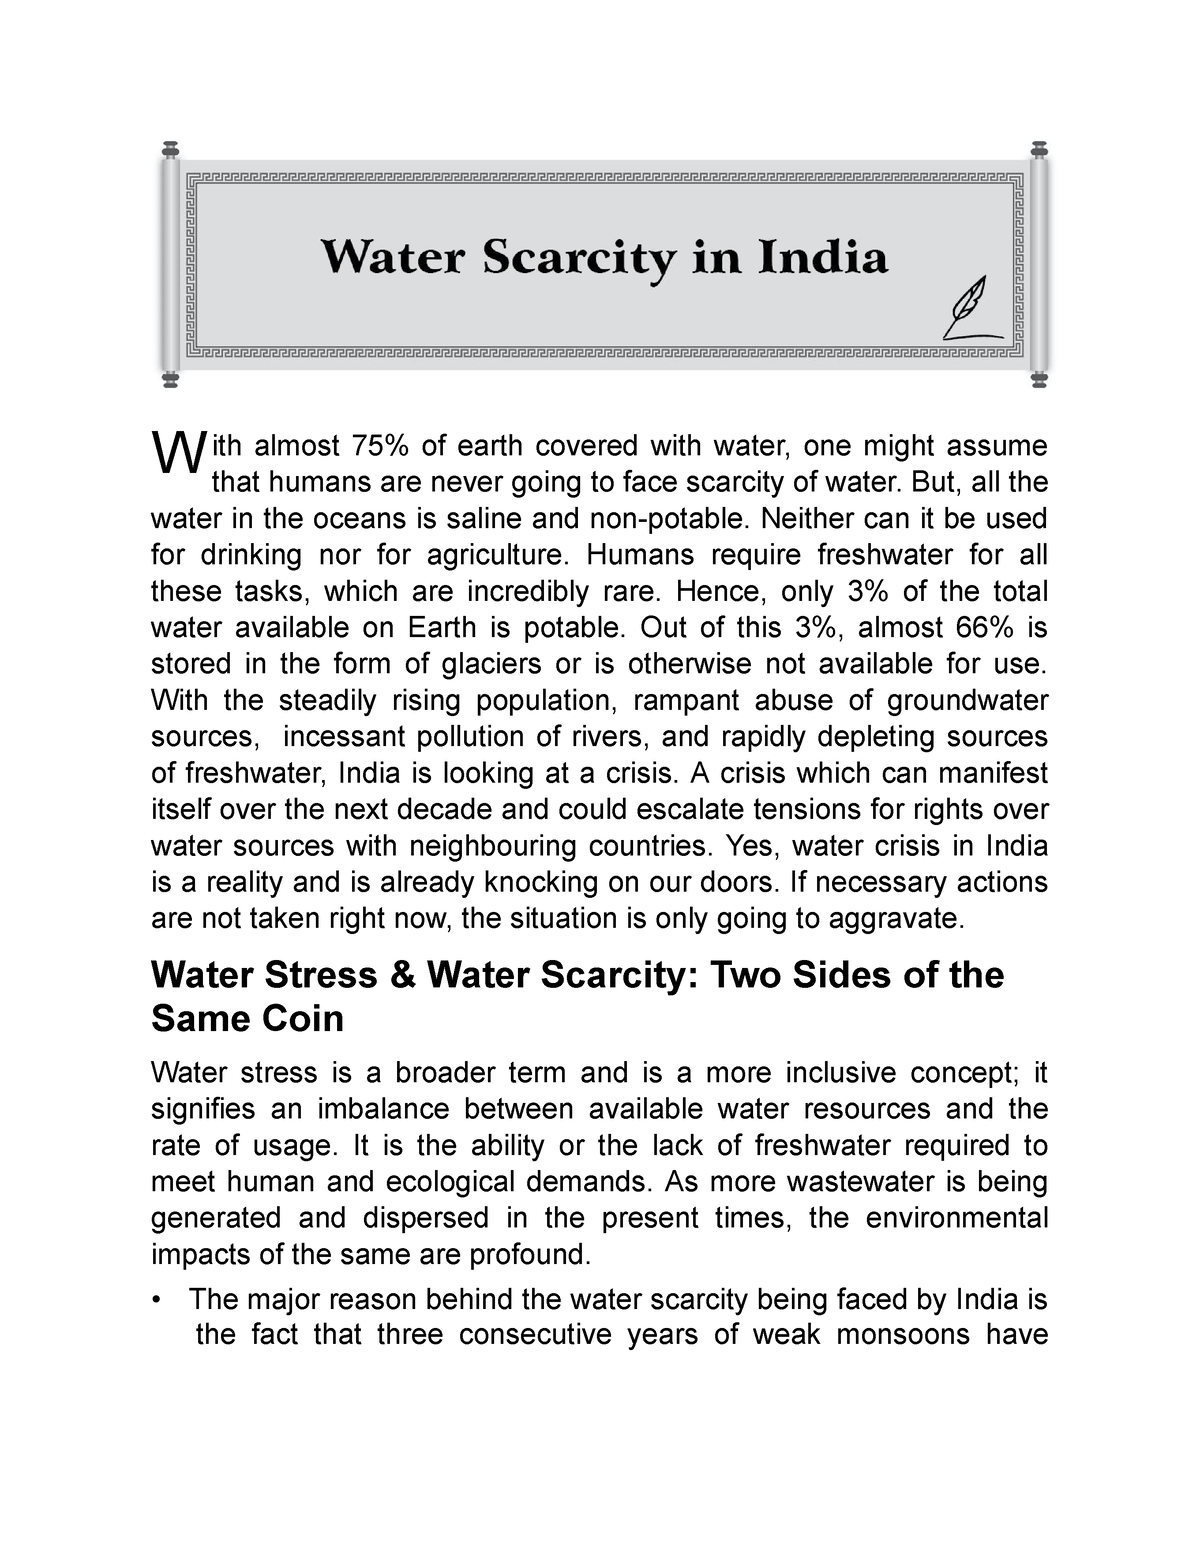 essay for scarcity of water